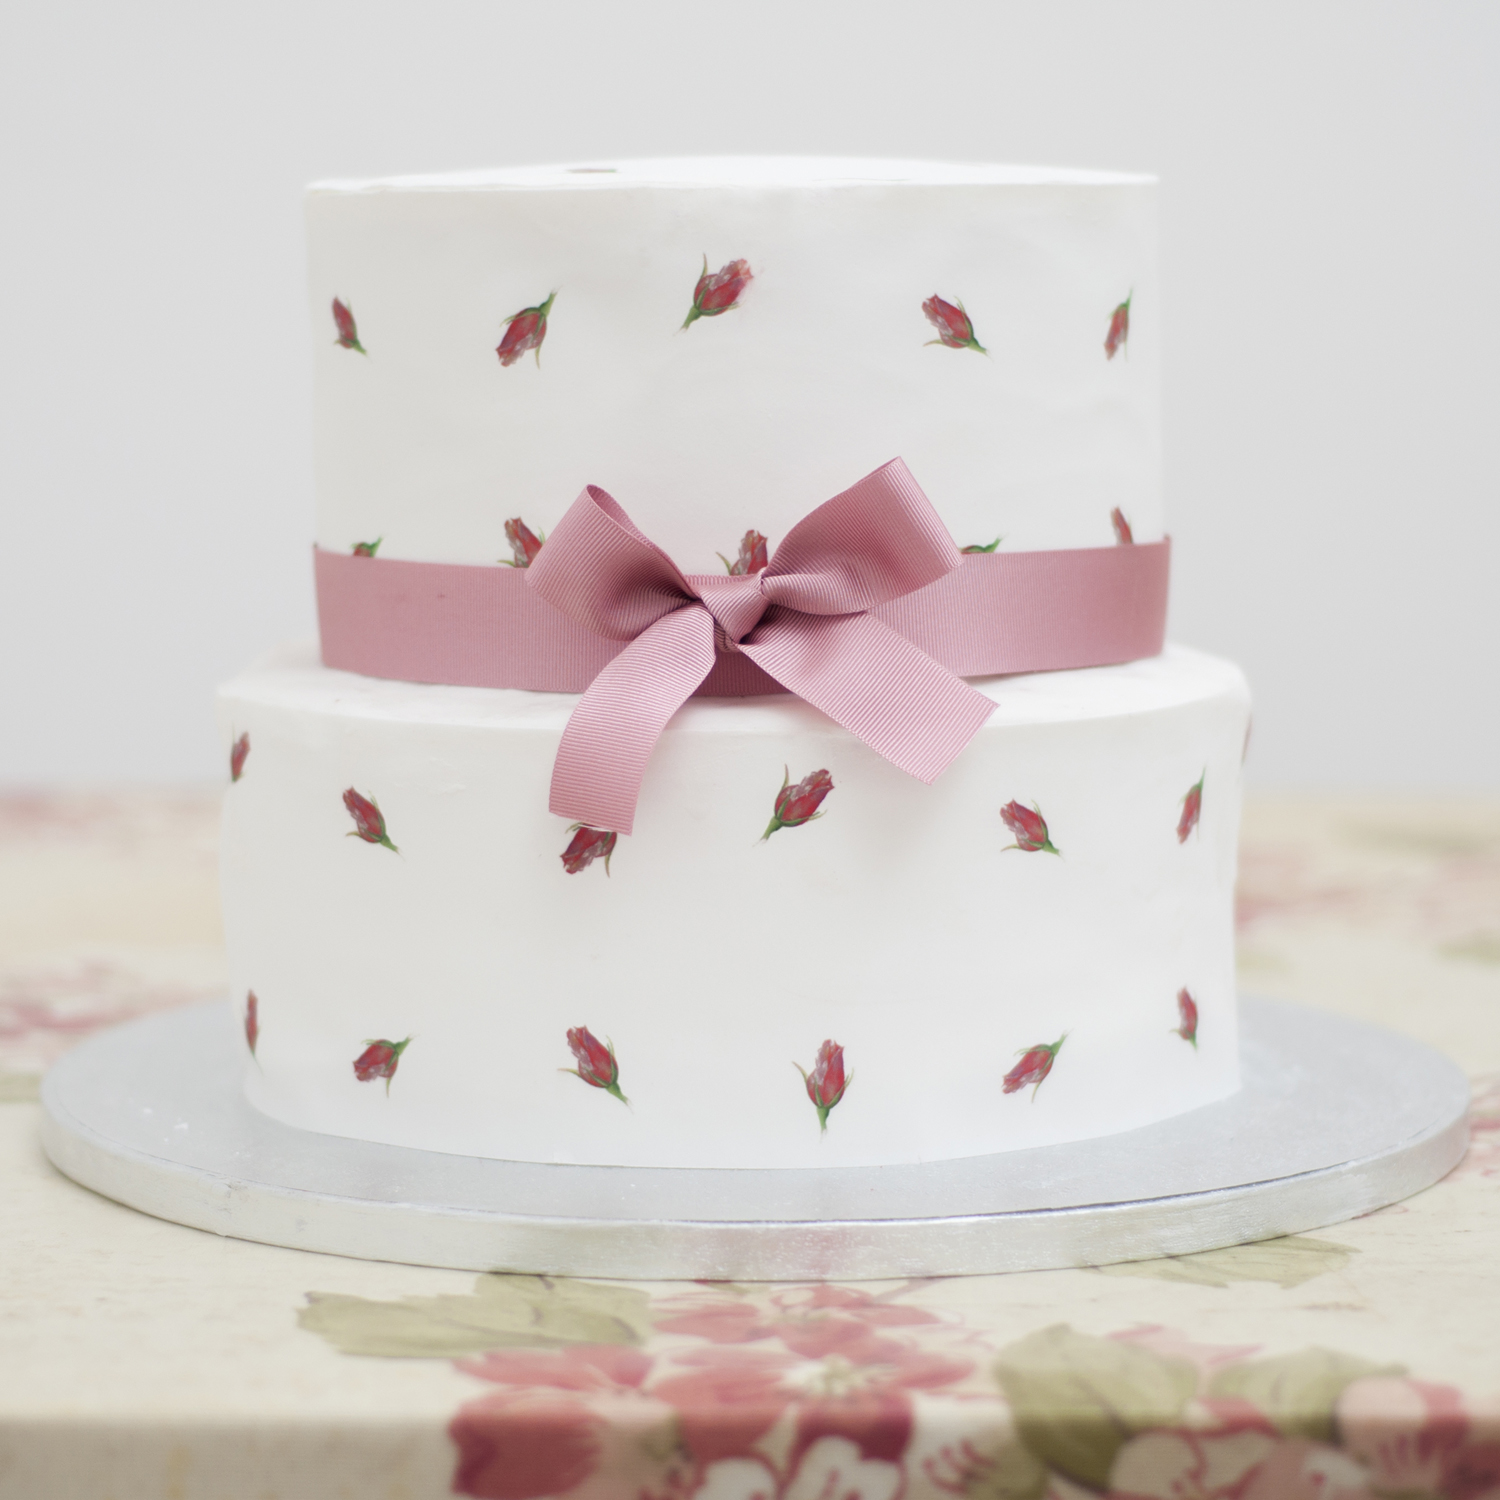 A printed rose pink two tier wedding cake - The Little Wedding Company